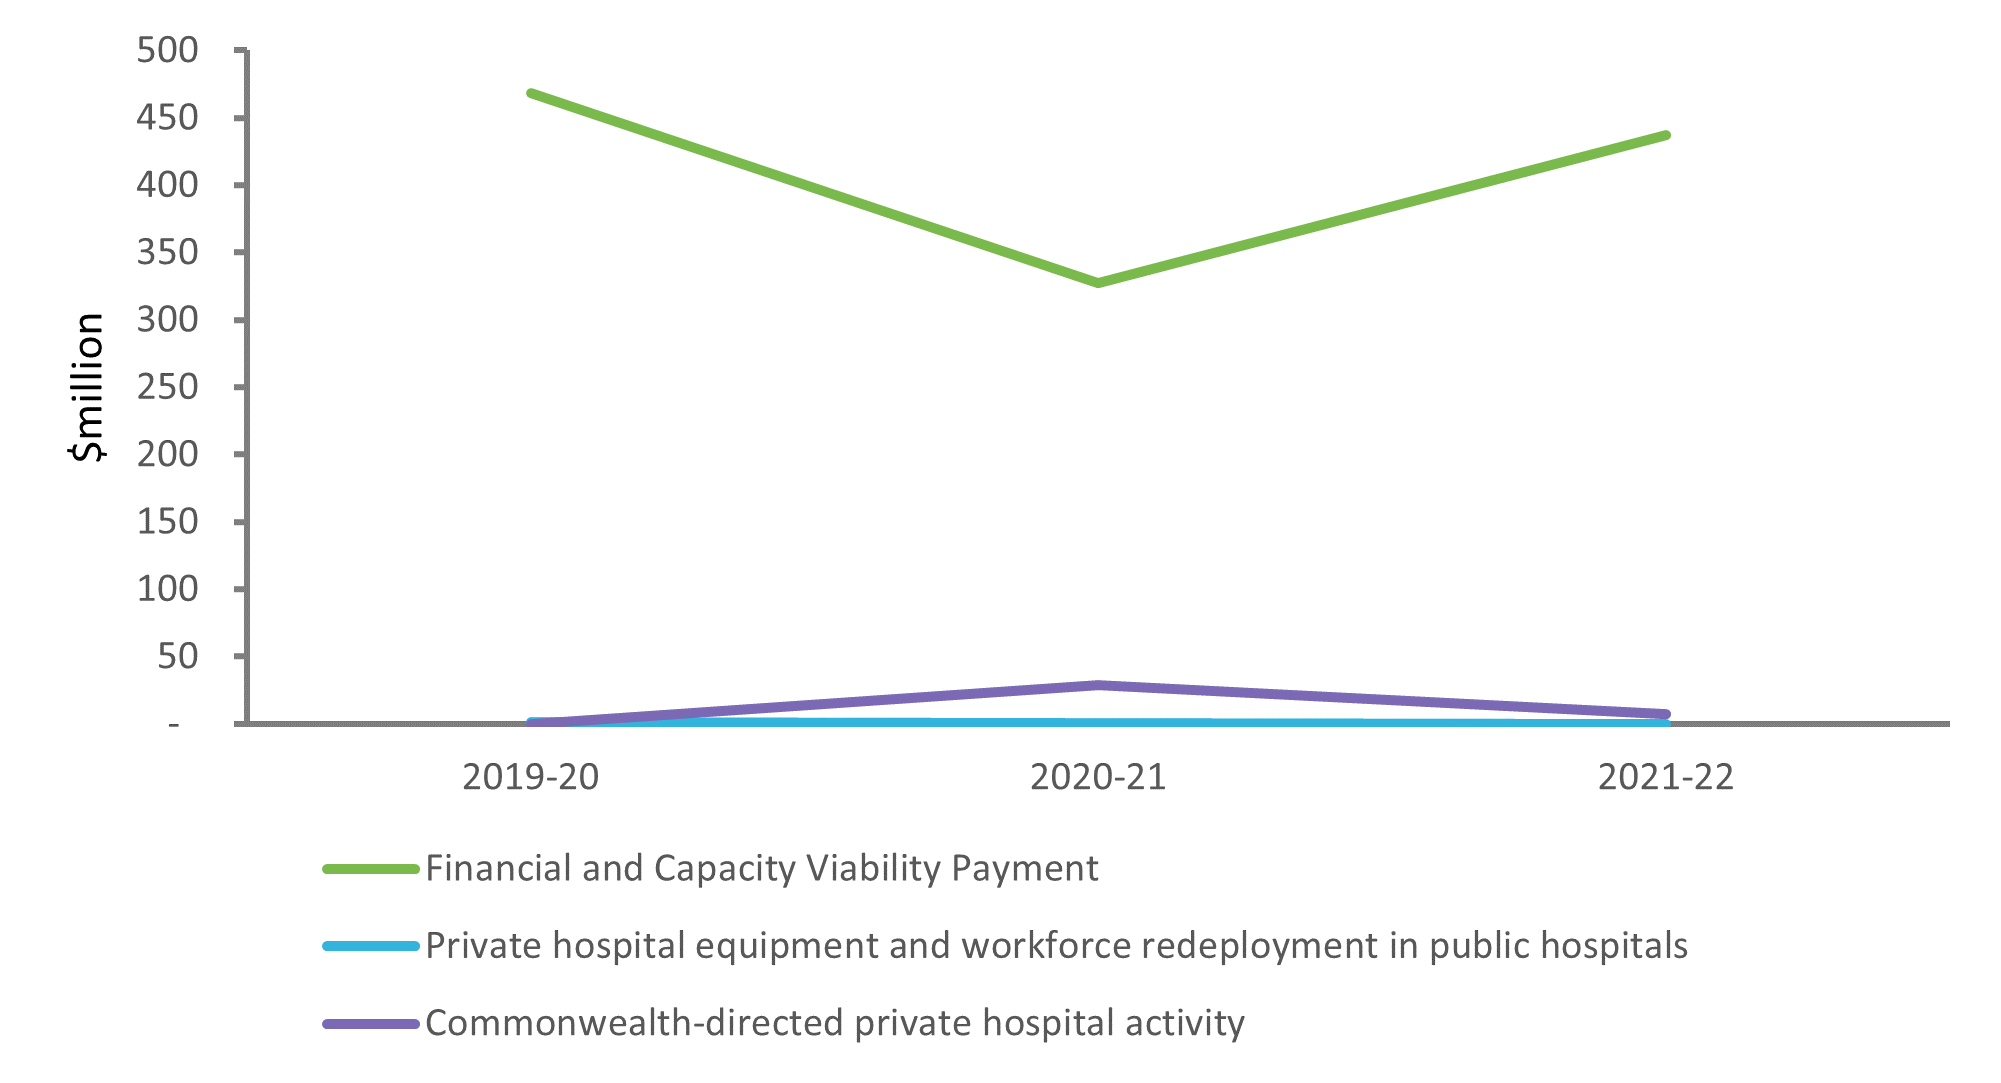 The line chart shows private hospital financial viability payment from 2019-20 to 2021-22 by financial and capacity viability payment, private hospital equipment and workforce redeployment in public hospitals and commonwealth-directed private hospital activity. While the financial and capacity viability payment decreased in 2020-21 and increase by 2021-22, the commonwealth-directed private hospital activity increased in 2020-21 and decreased by 2021-22.